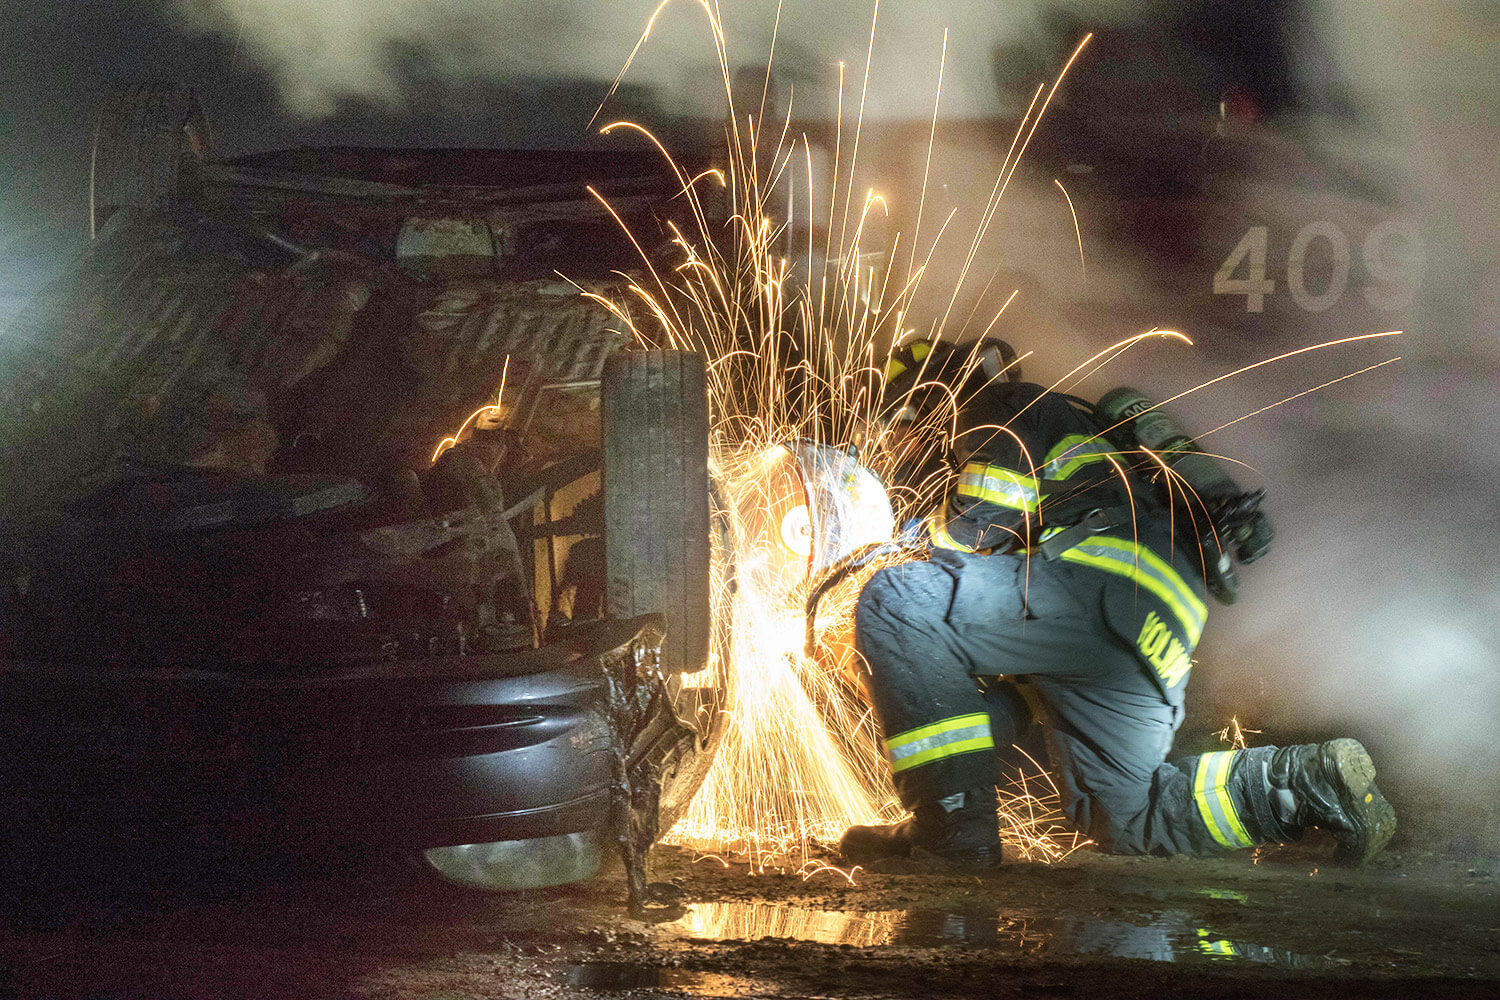 A Soldier with the 79th Engineer Company (Firefighting), Massachusetts Army National Guard, uses a circular saw to cut through a car door during a training exercise at Tactical Training Base Kelley on Joint Base Cape Cod, Mass. The training required Soldiers to ascertain the best method to evacuate dummies from a vehicle that was flipped and burning in the night. Massachusetts Army National Guard photo by PFC Sean Park